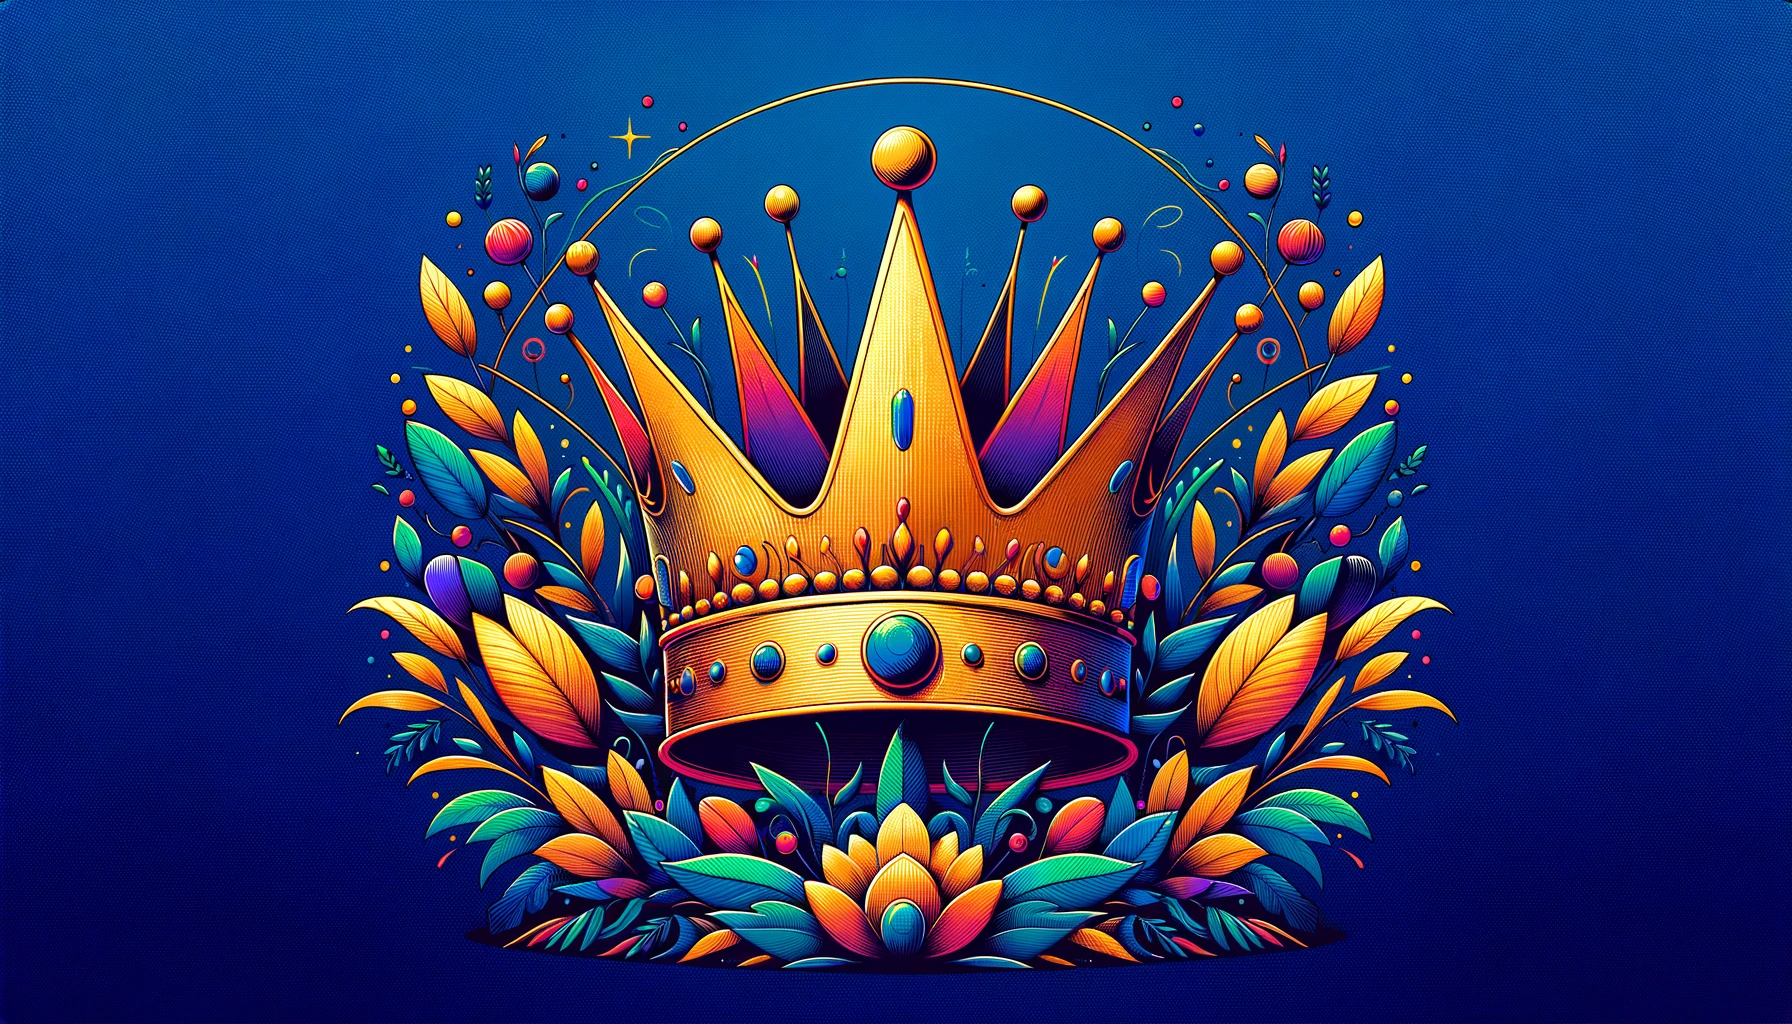 domain authority featured image - crown and plants